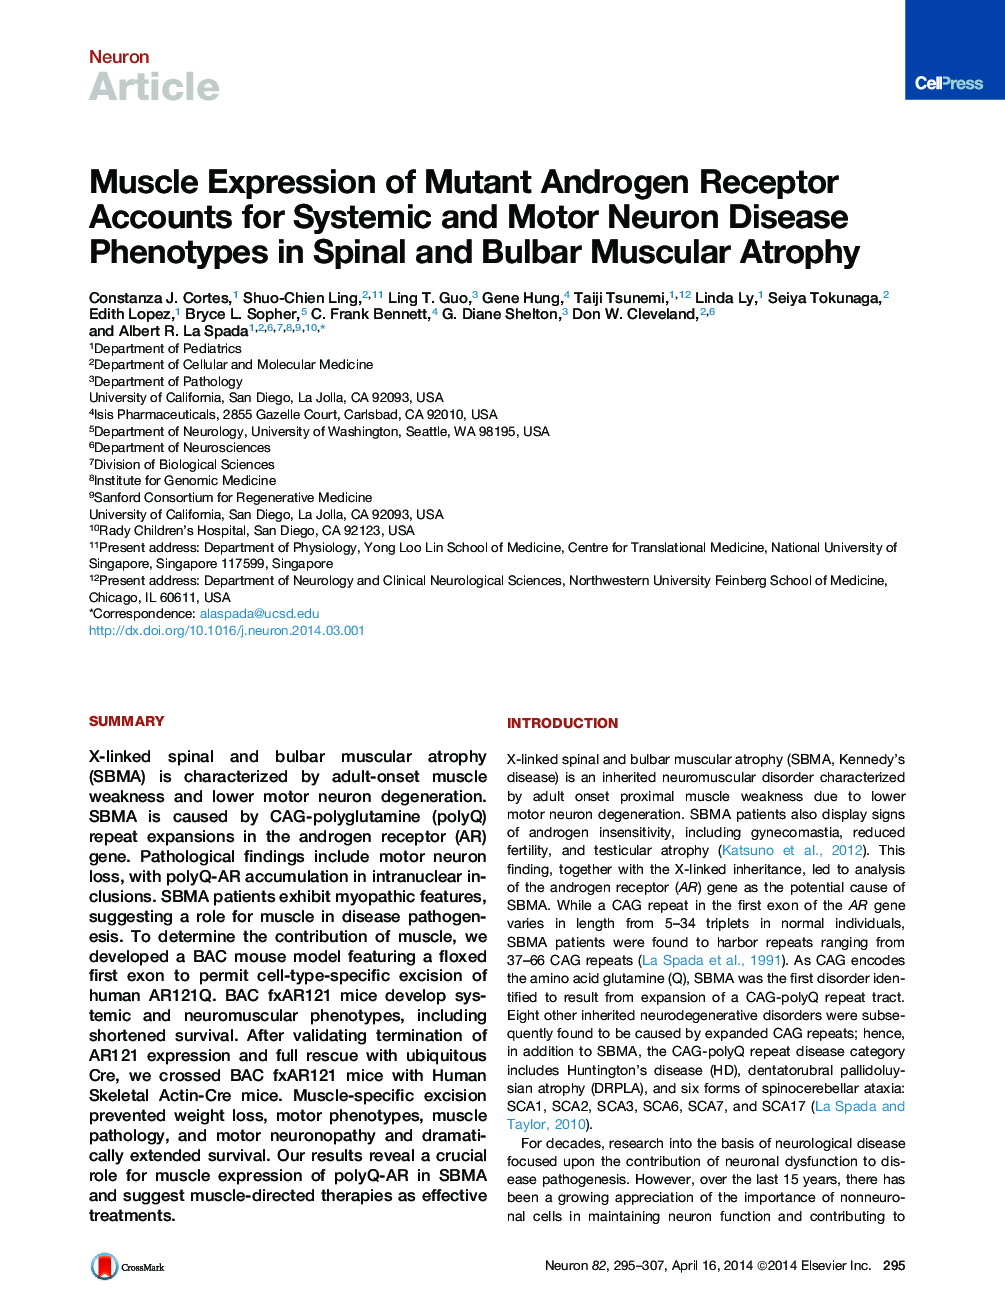 Muscle Expression of Mutant Androgen Receptor Accounts for Systemic and Motor Neuron Disease Phenotypes in Spinal and Bulbar Muscular Atrophy